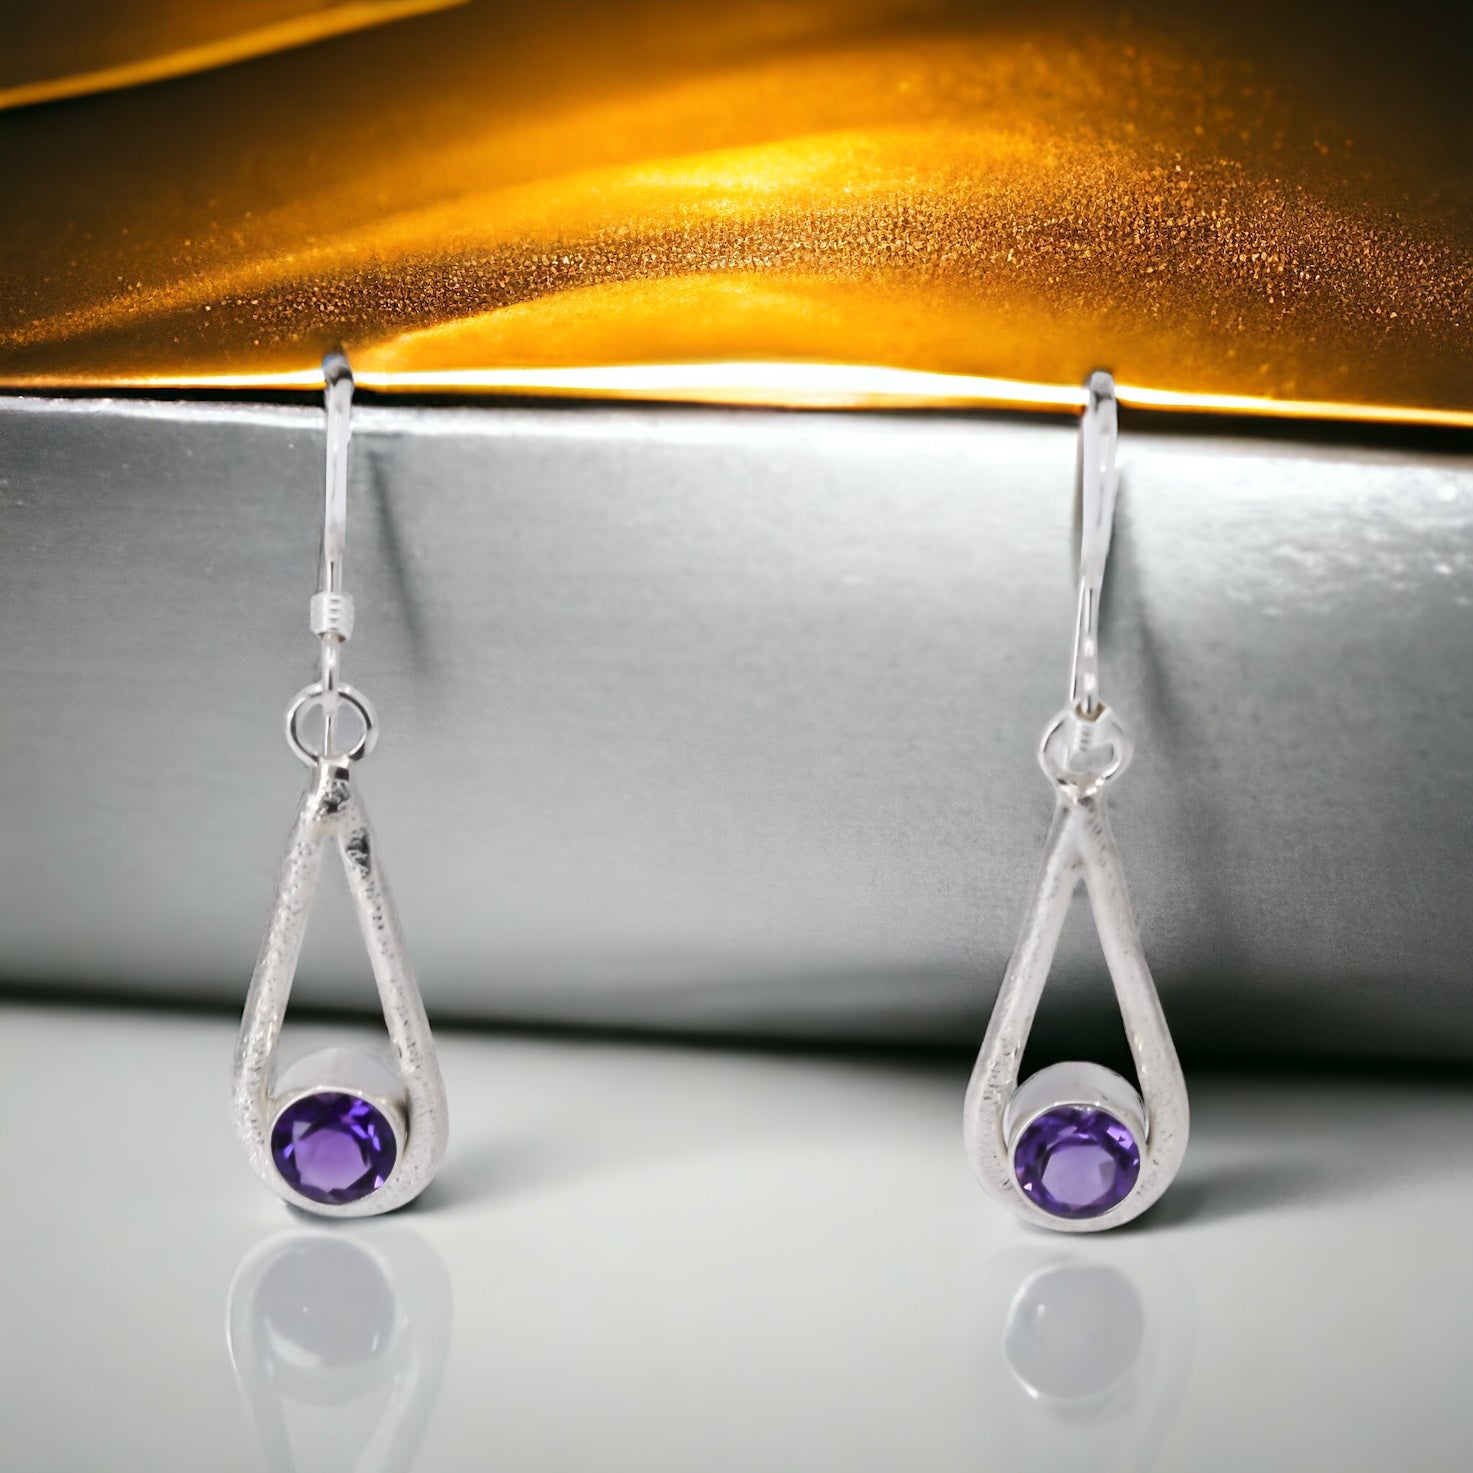 sterling silver textured teardop dangle earrings with round, faceted amethyst stones